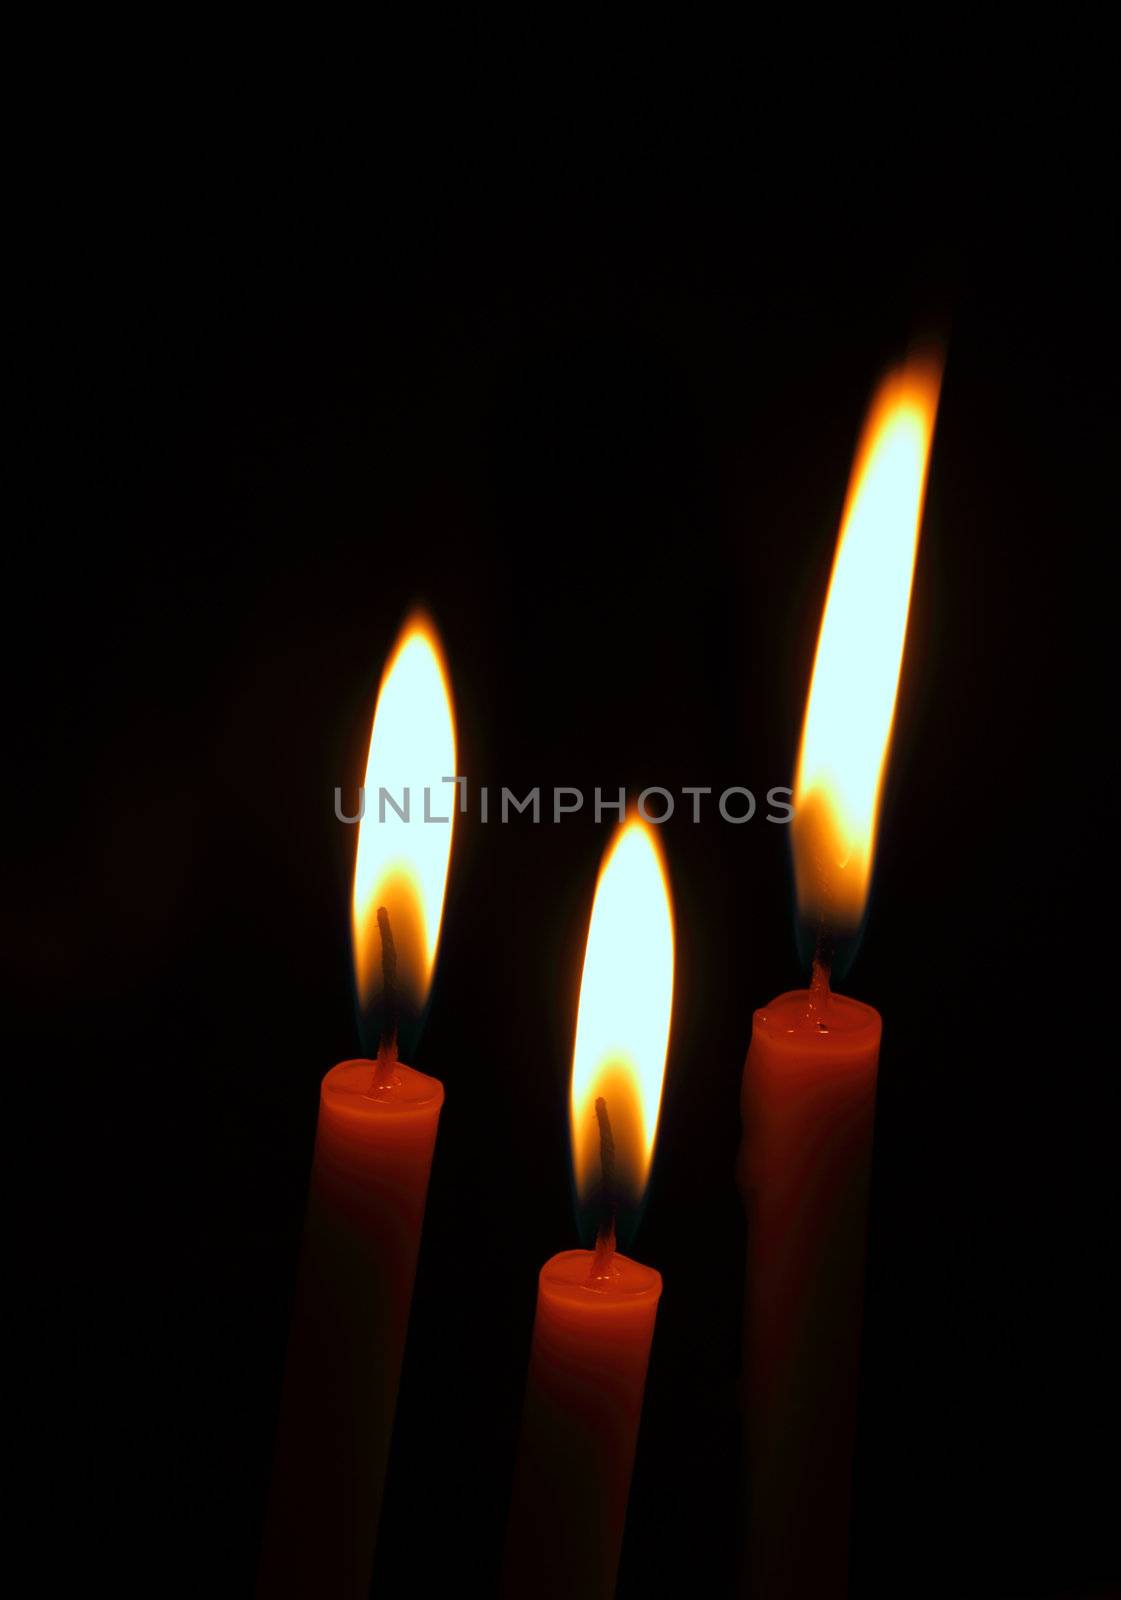 three burning candles on a black background